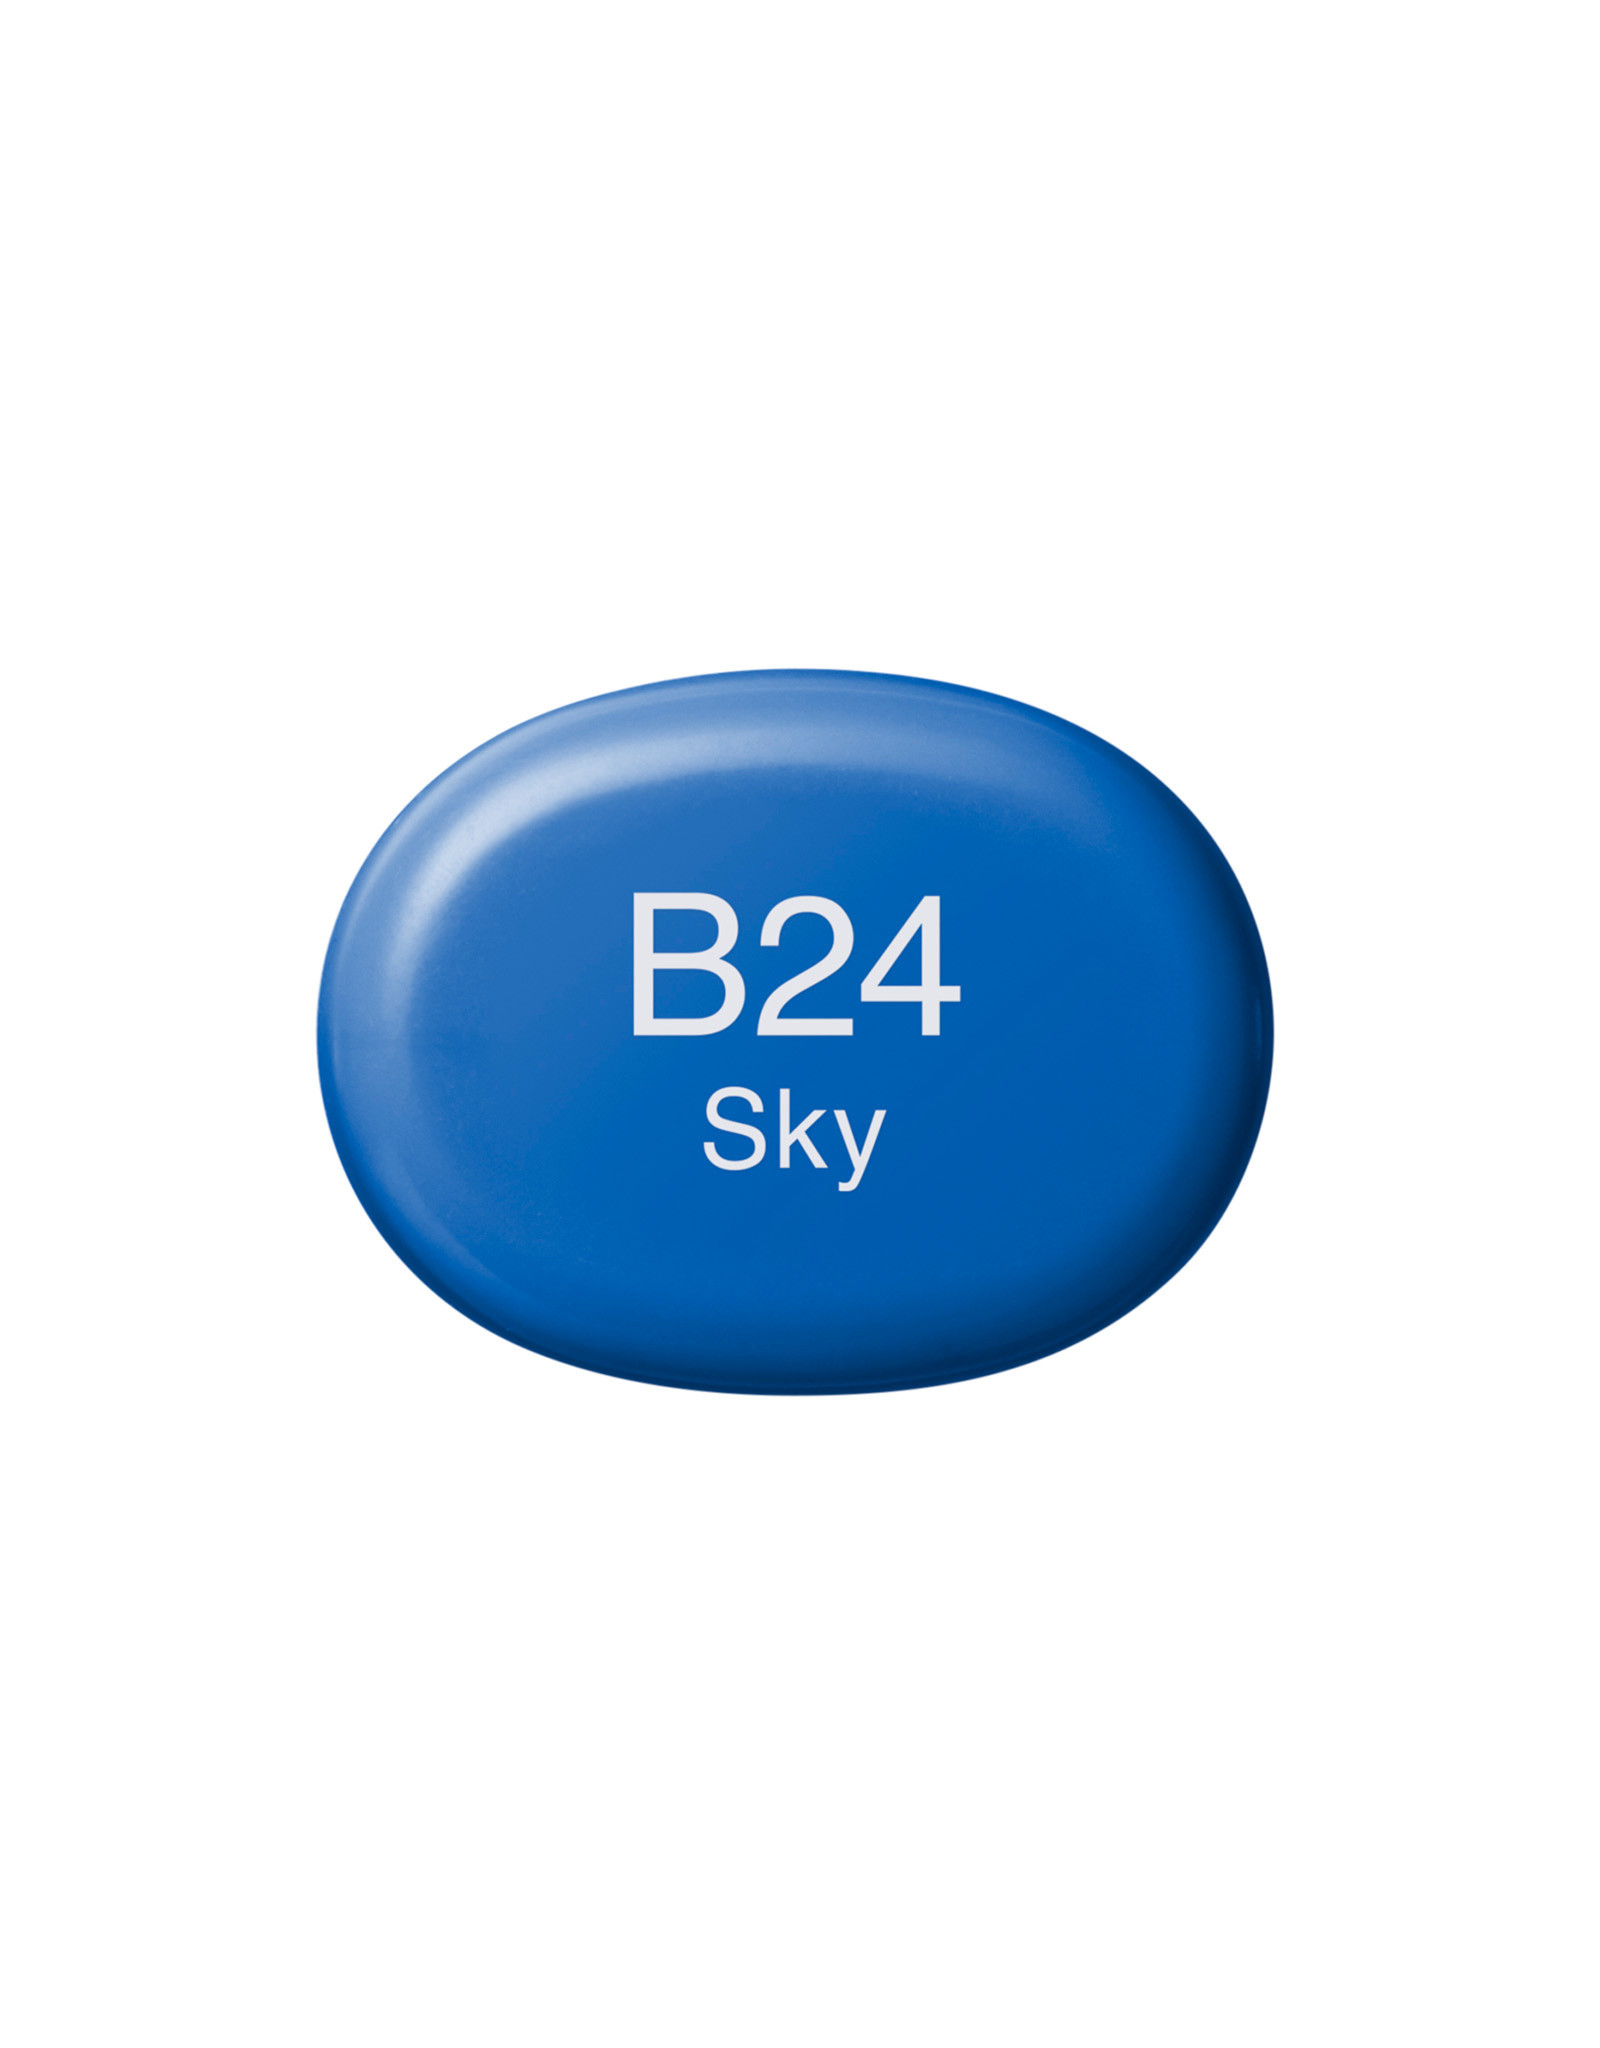 Copic - Sketch Marker - Sky - B24  Copic sketch markers, Sketch markers,  Copic